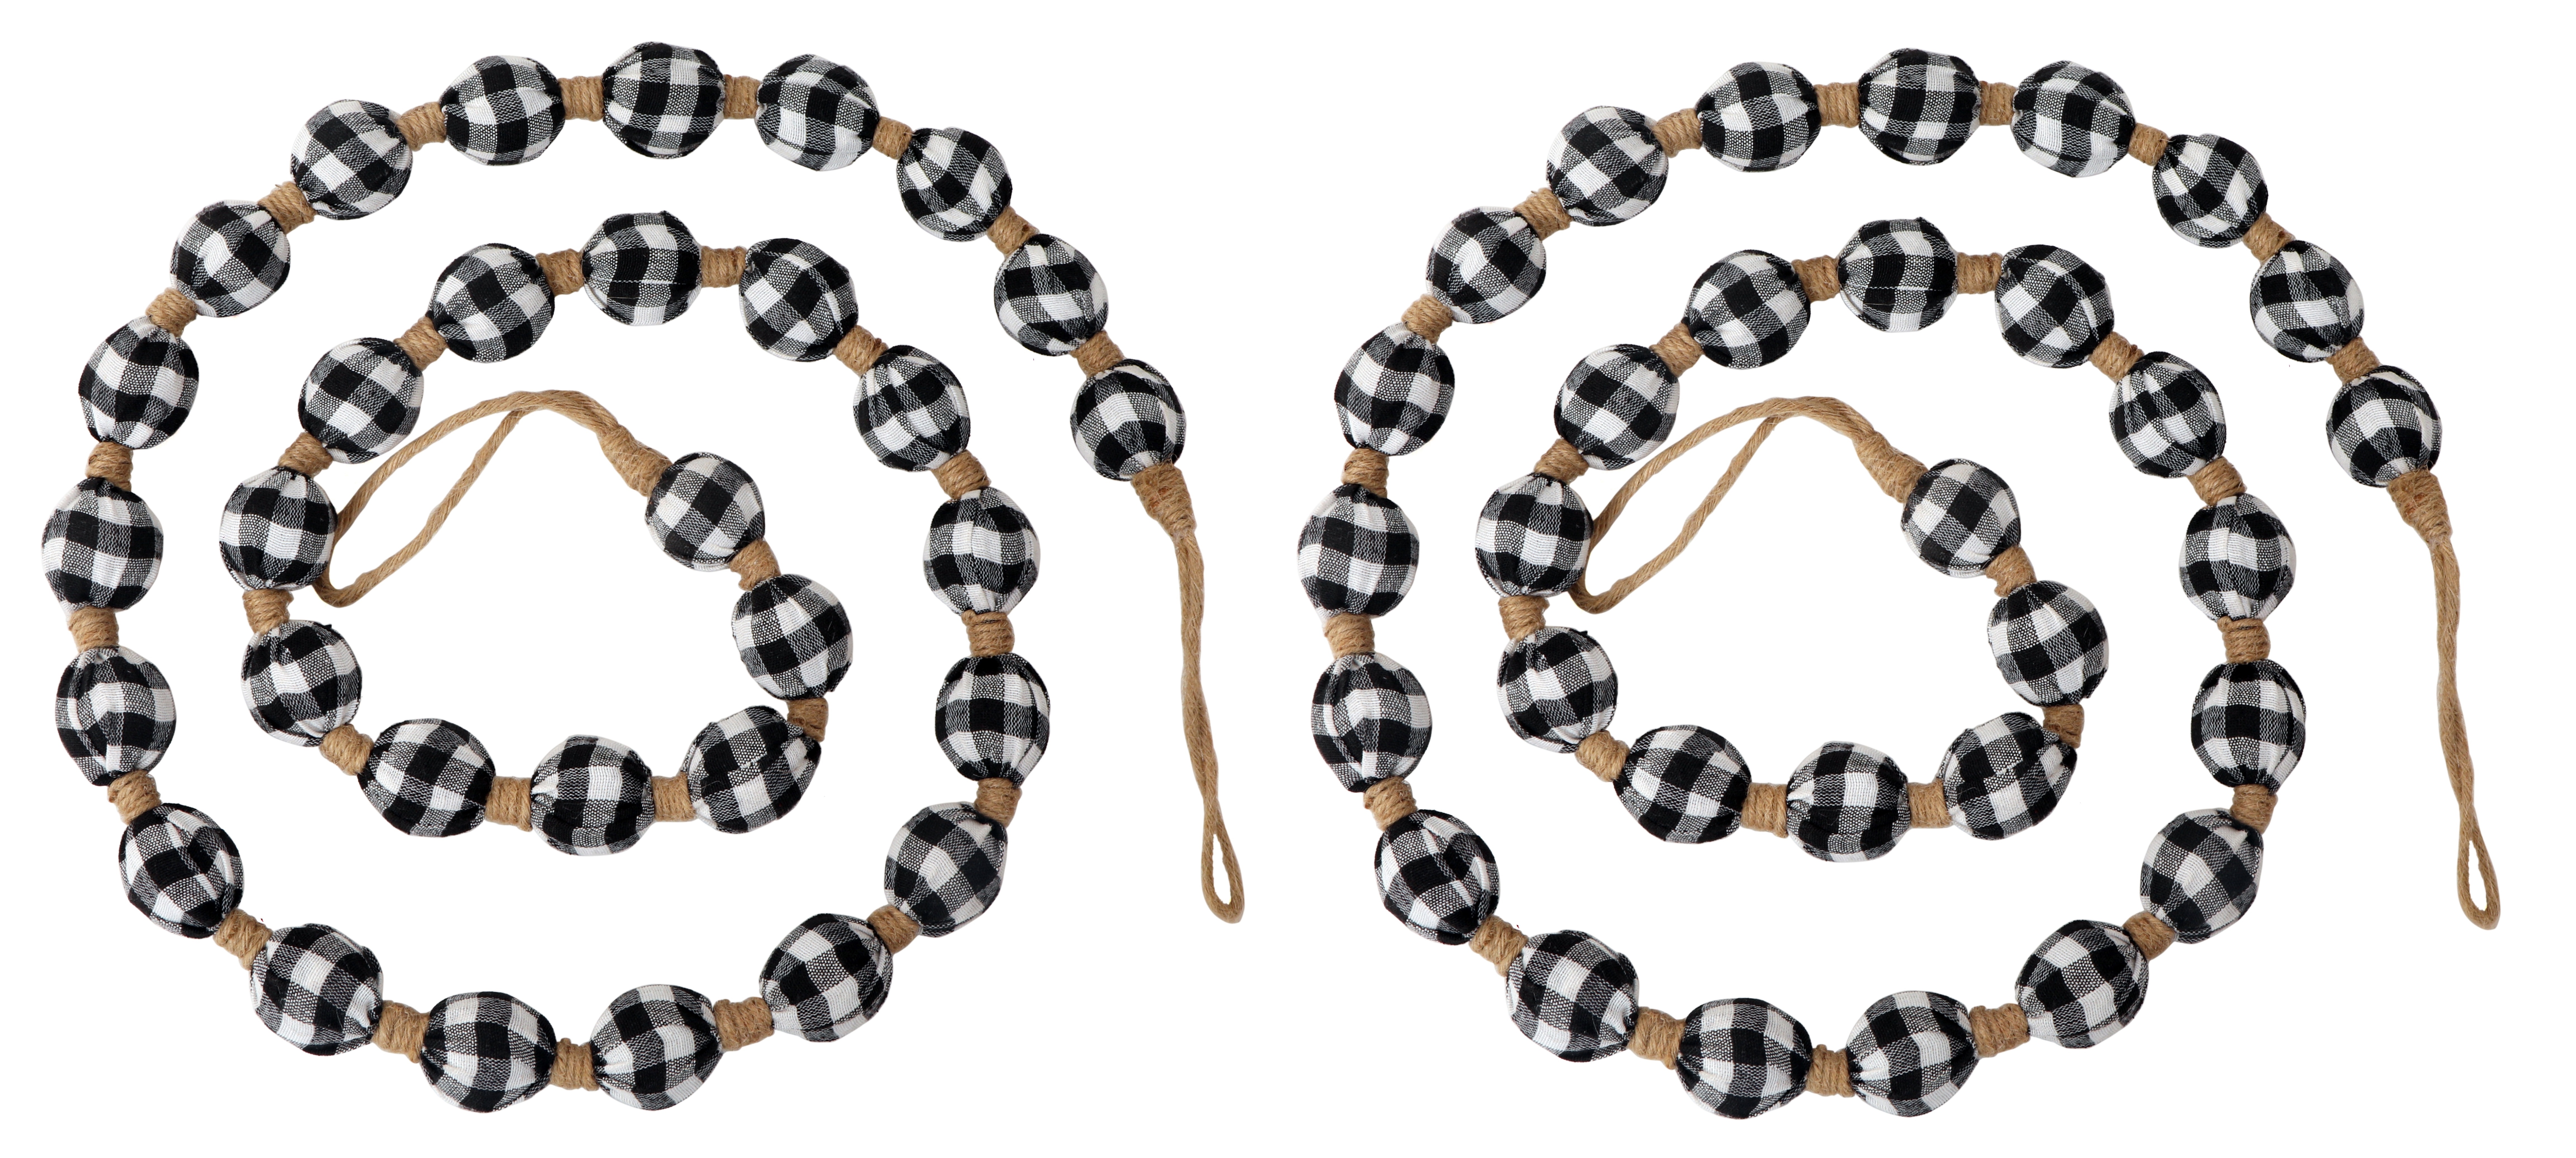 Holiday Time DC S2 - 6 feet Black/ White Fabric Garland (Set of 2 garlands 6 feet each) - image 1 of 6